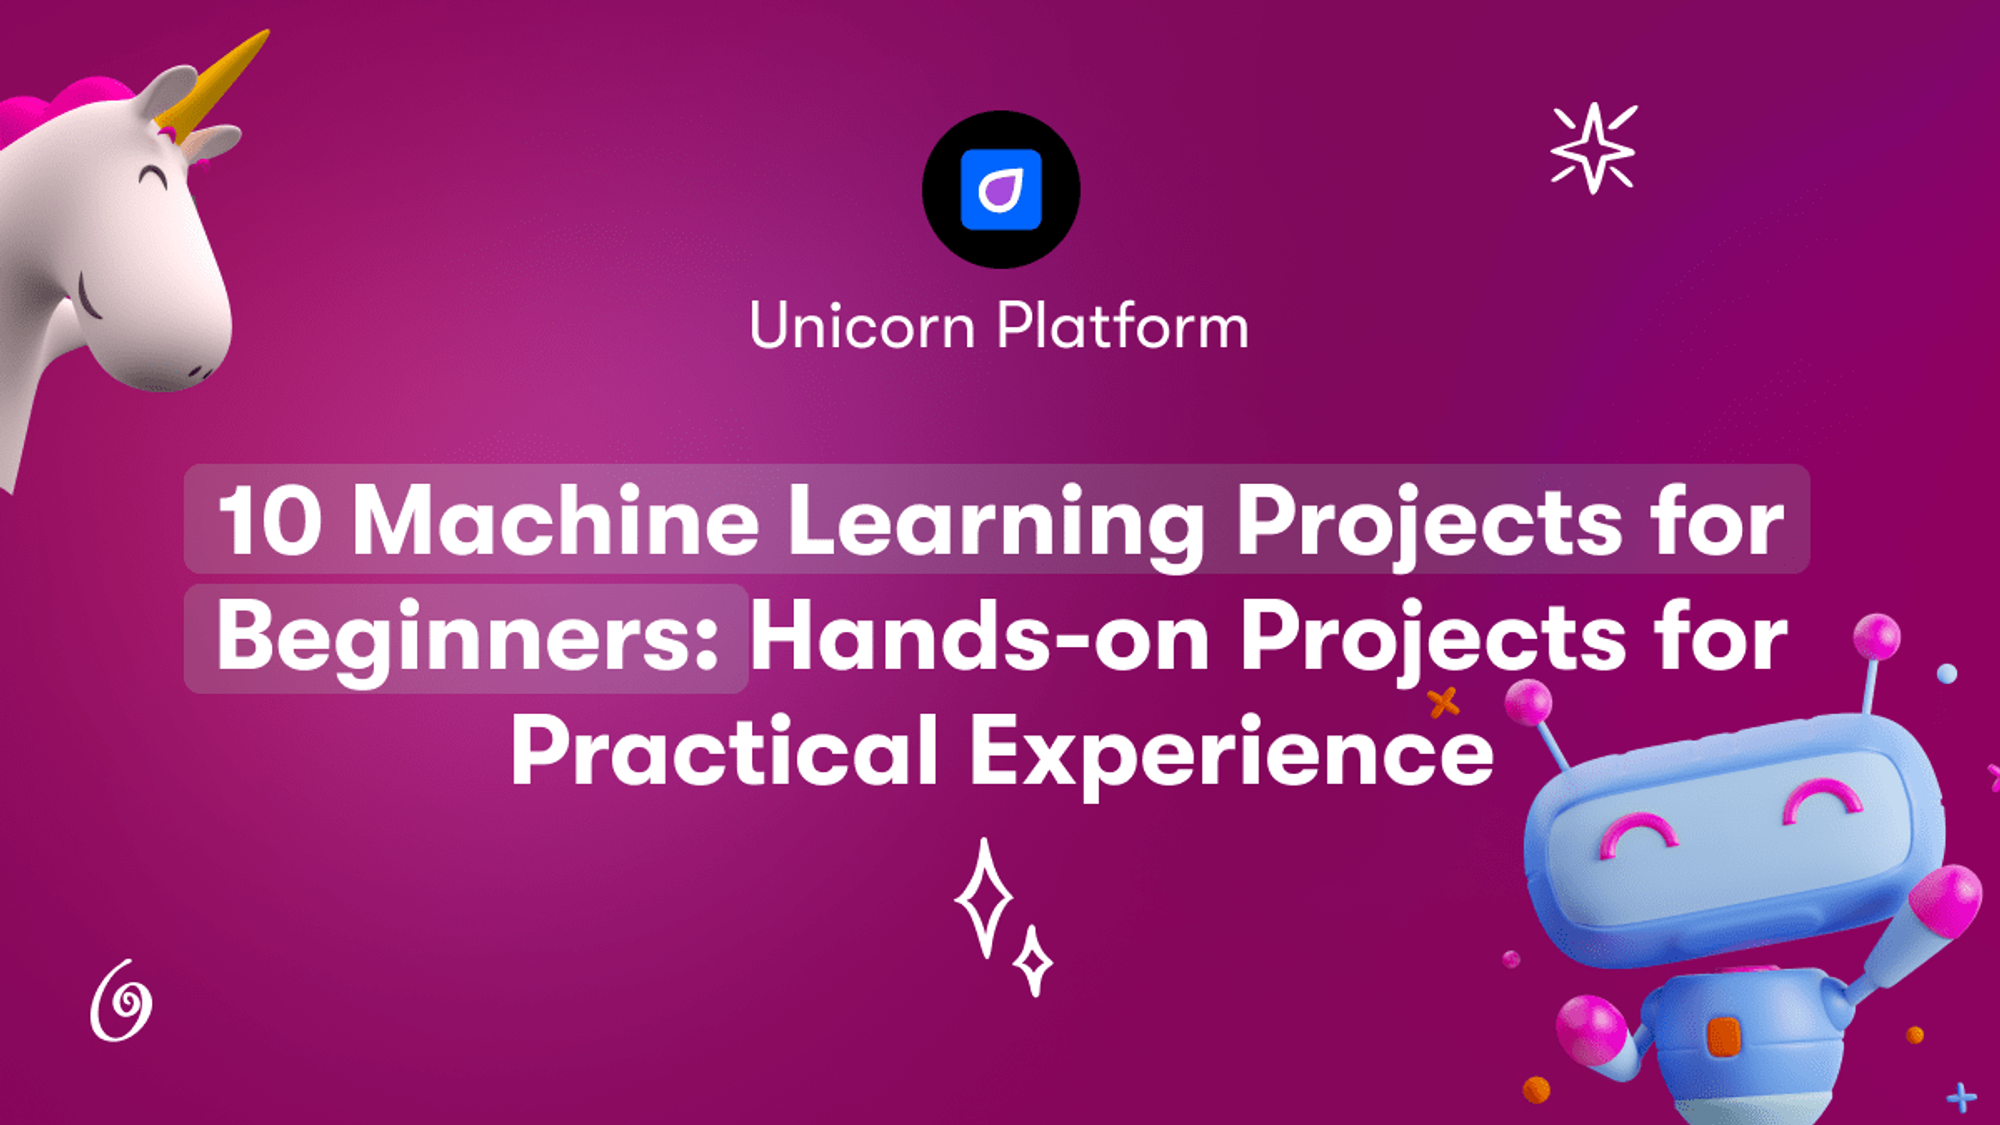 10 Machine Learning Projects for Beginners: Hands-on Projects for Practical Experience